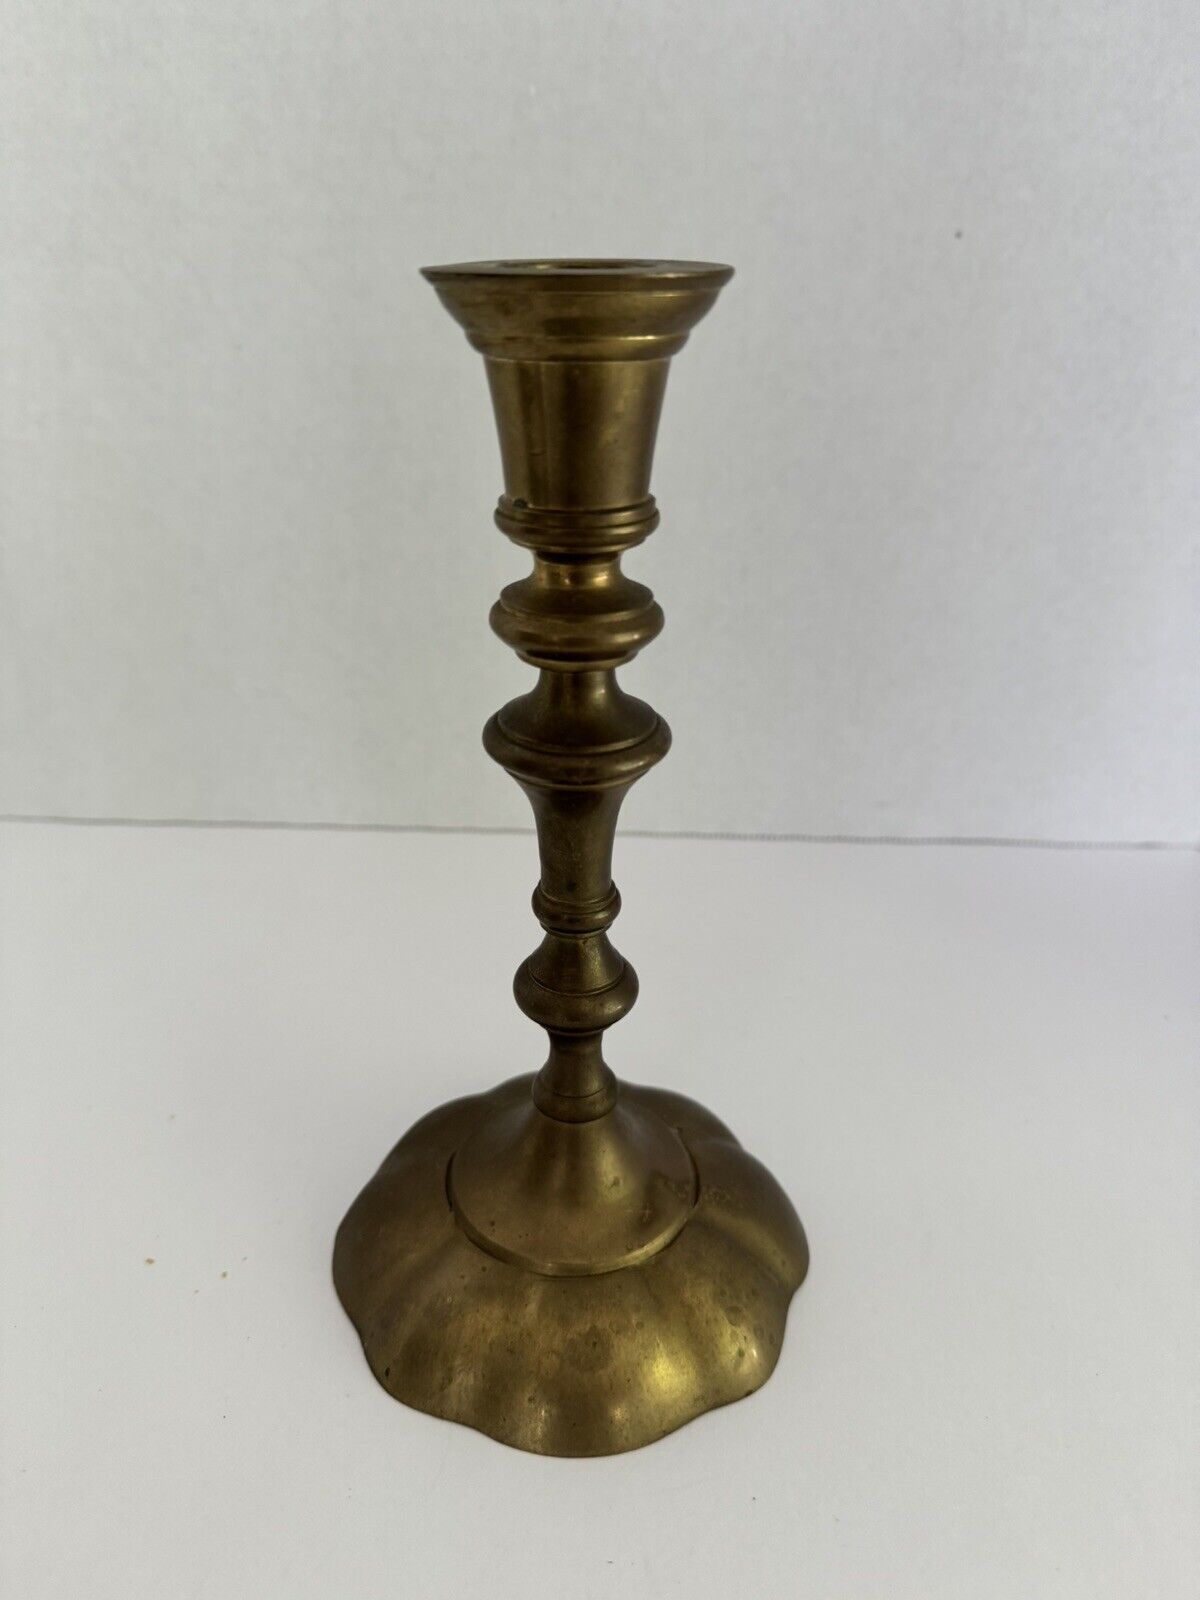 8” Vintage Solid Brass Candlestick Holder- Screws Apart And Can Be Made Shorter